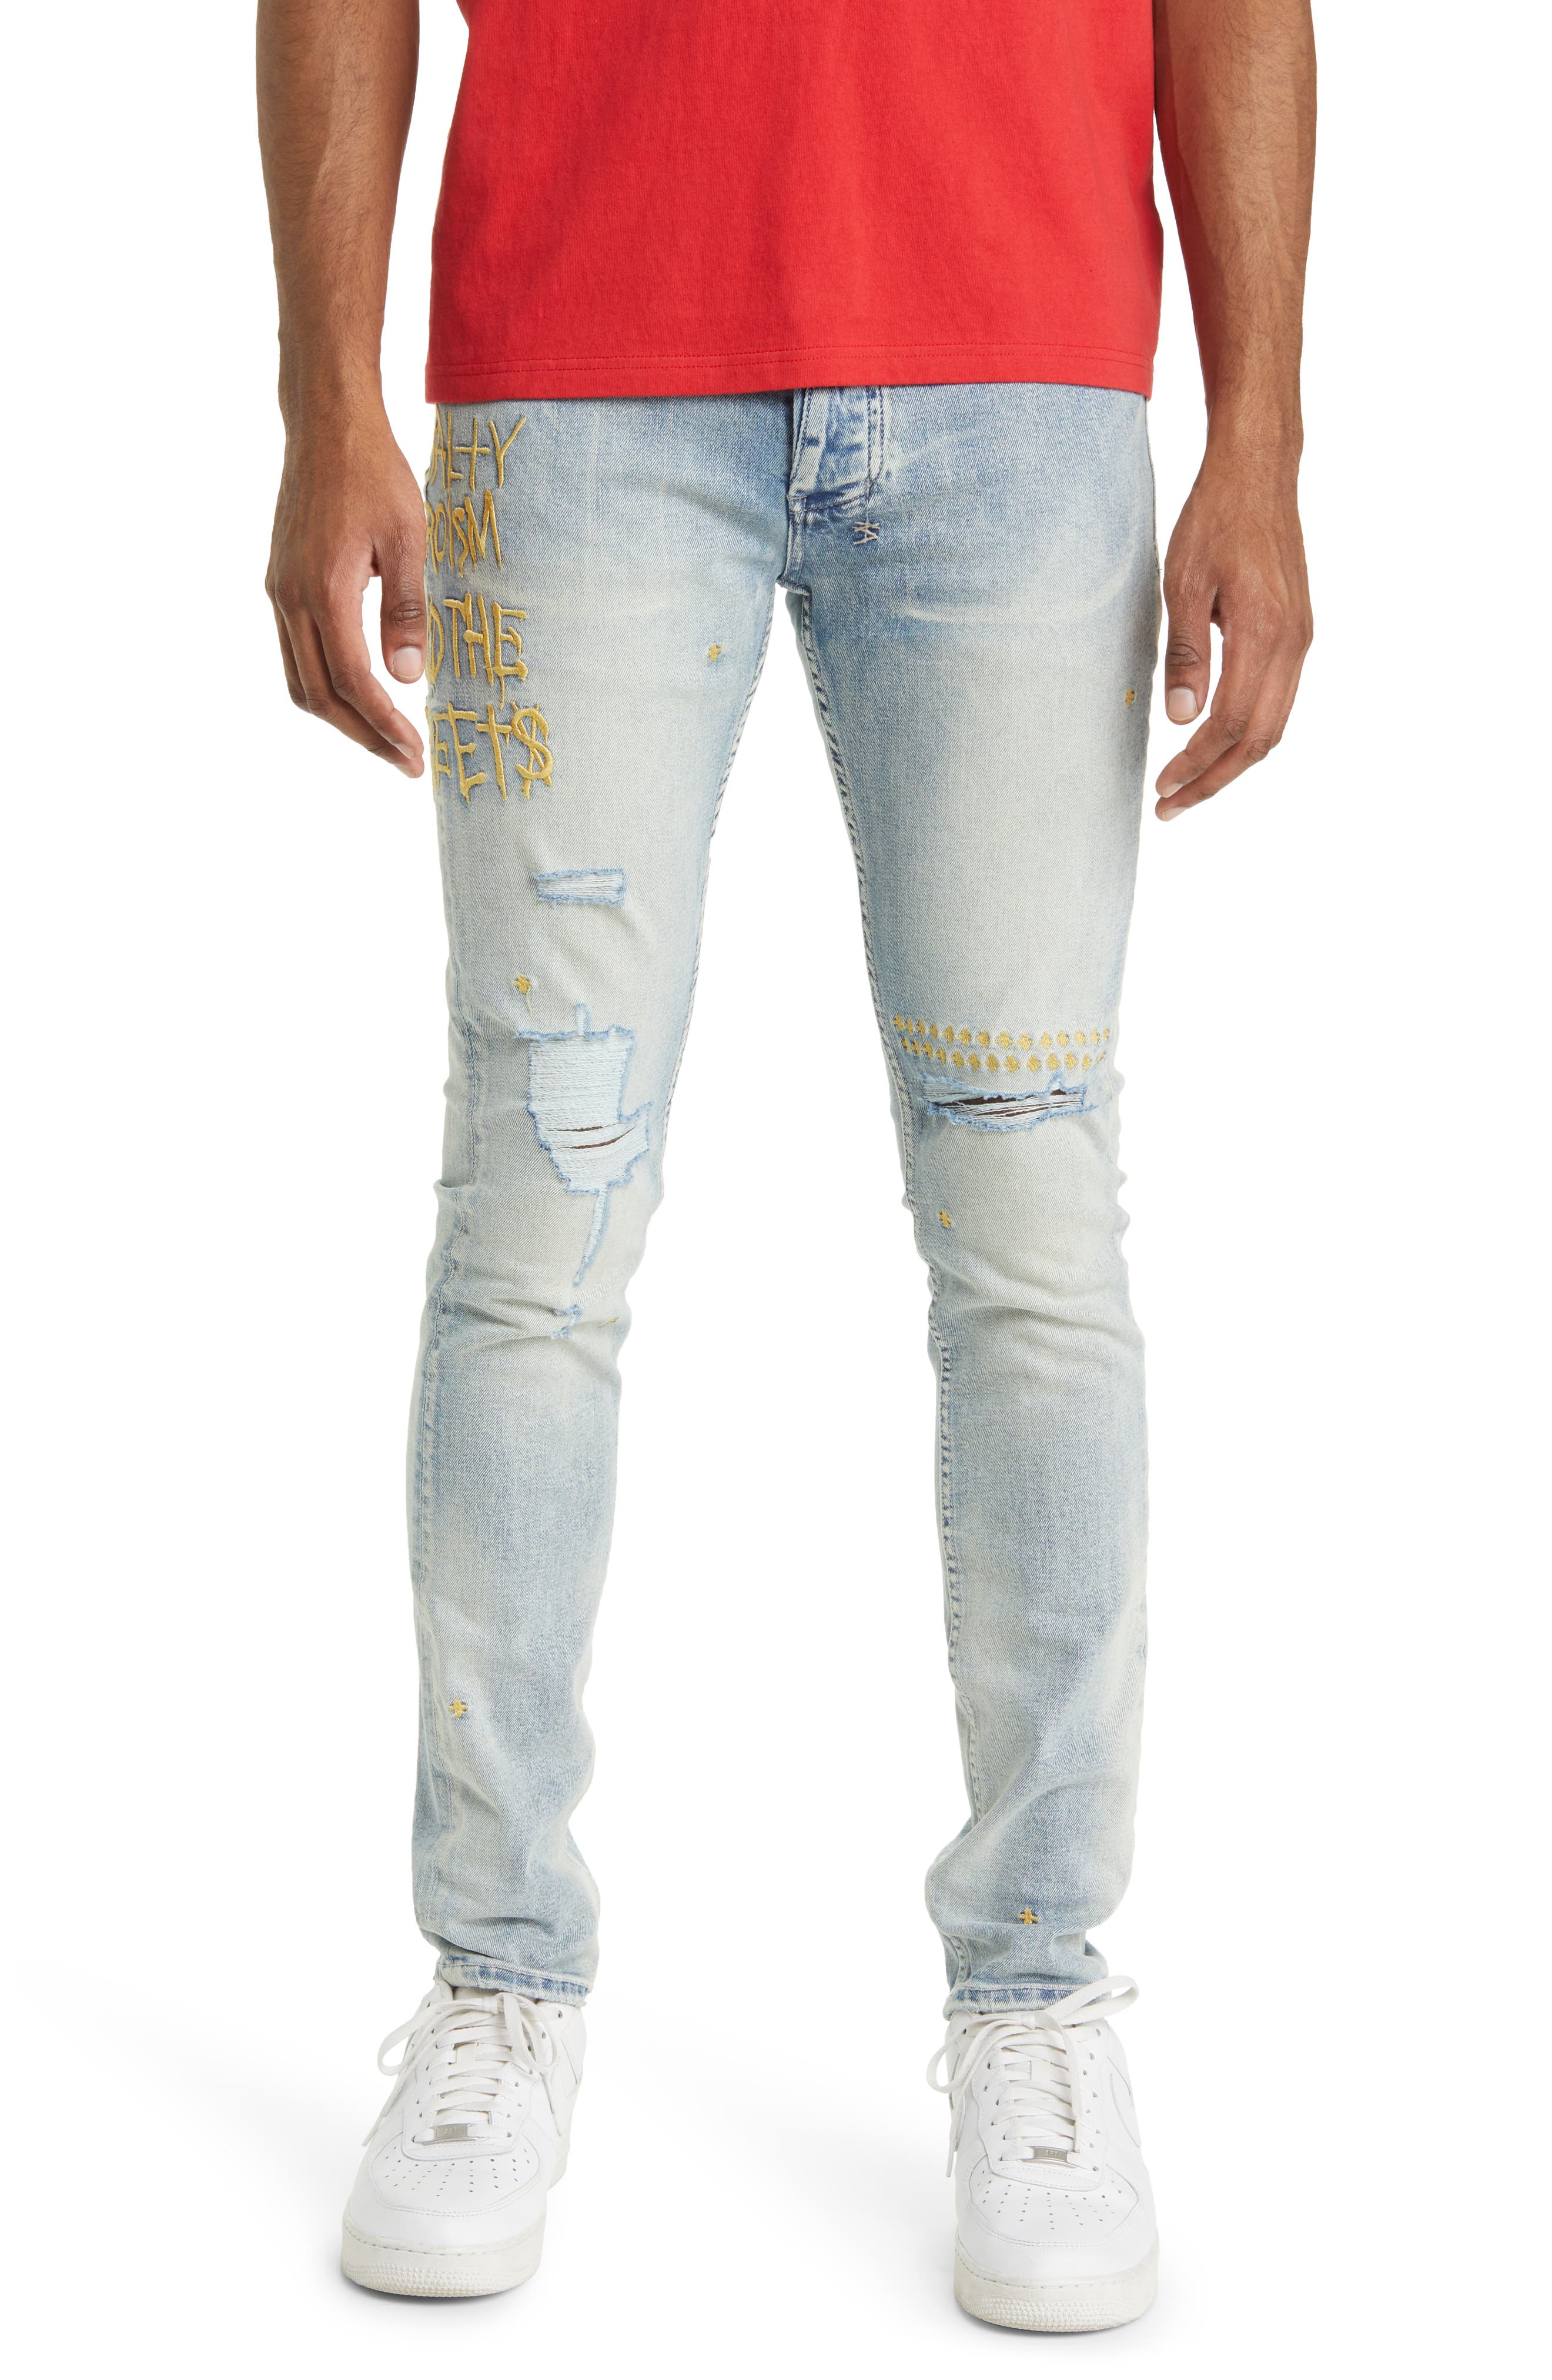 fire safe Fire Jeans embellished and distressed Clothing Gender-Neutral Adult Clothing Trousers 